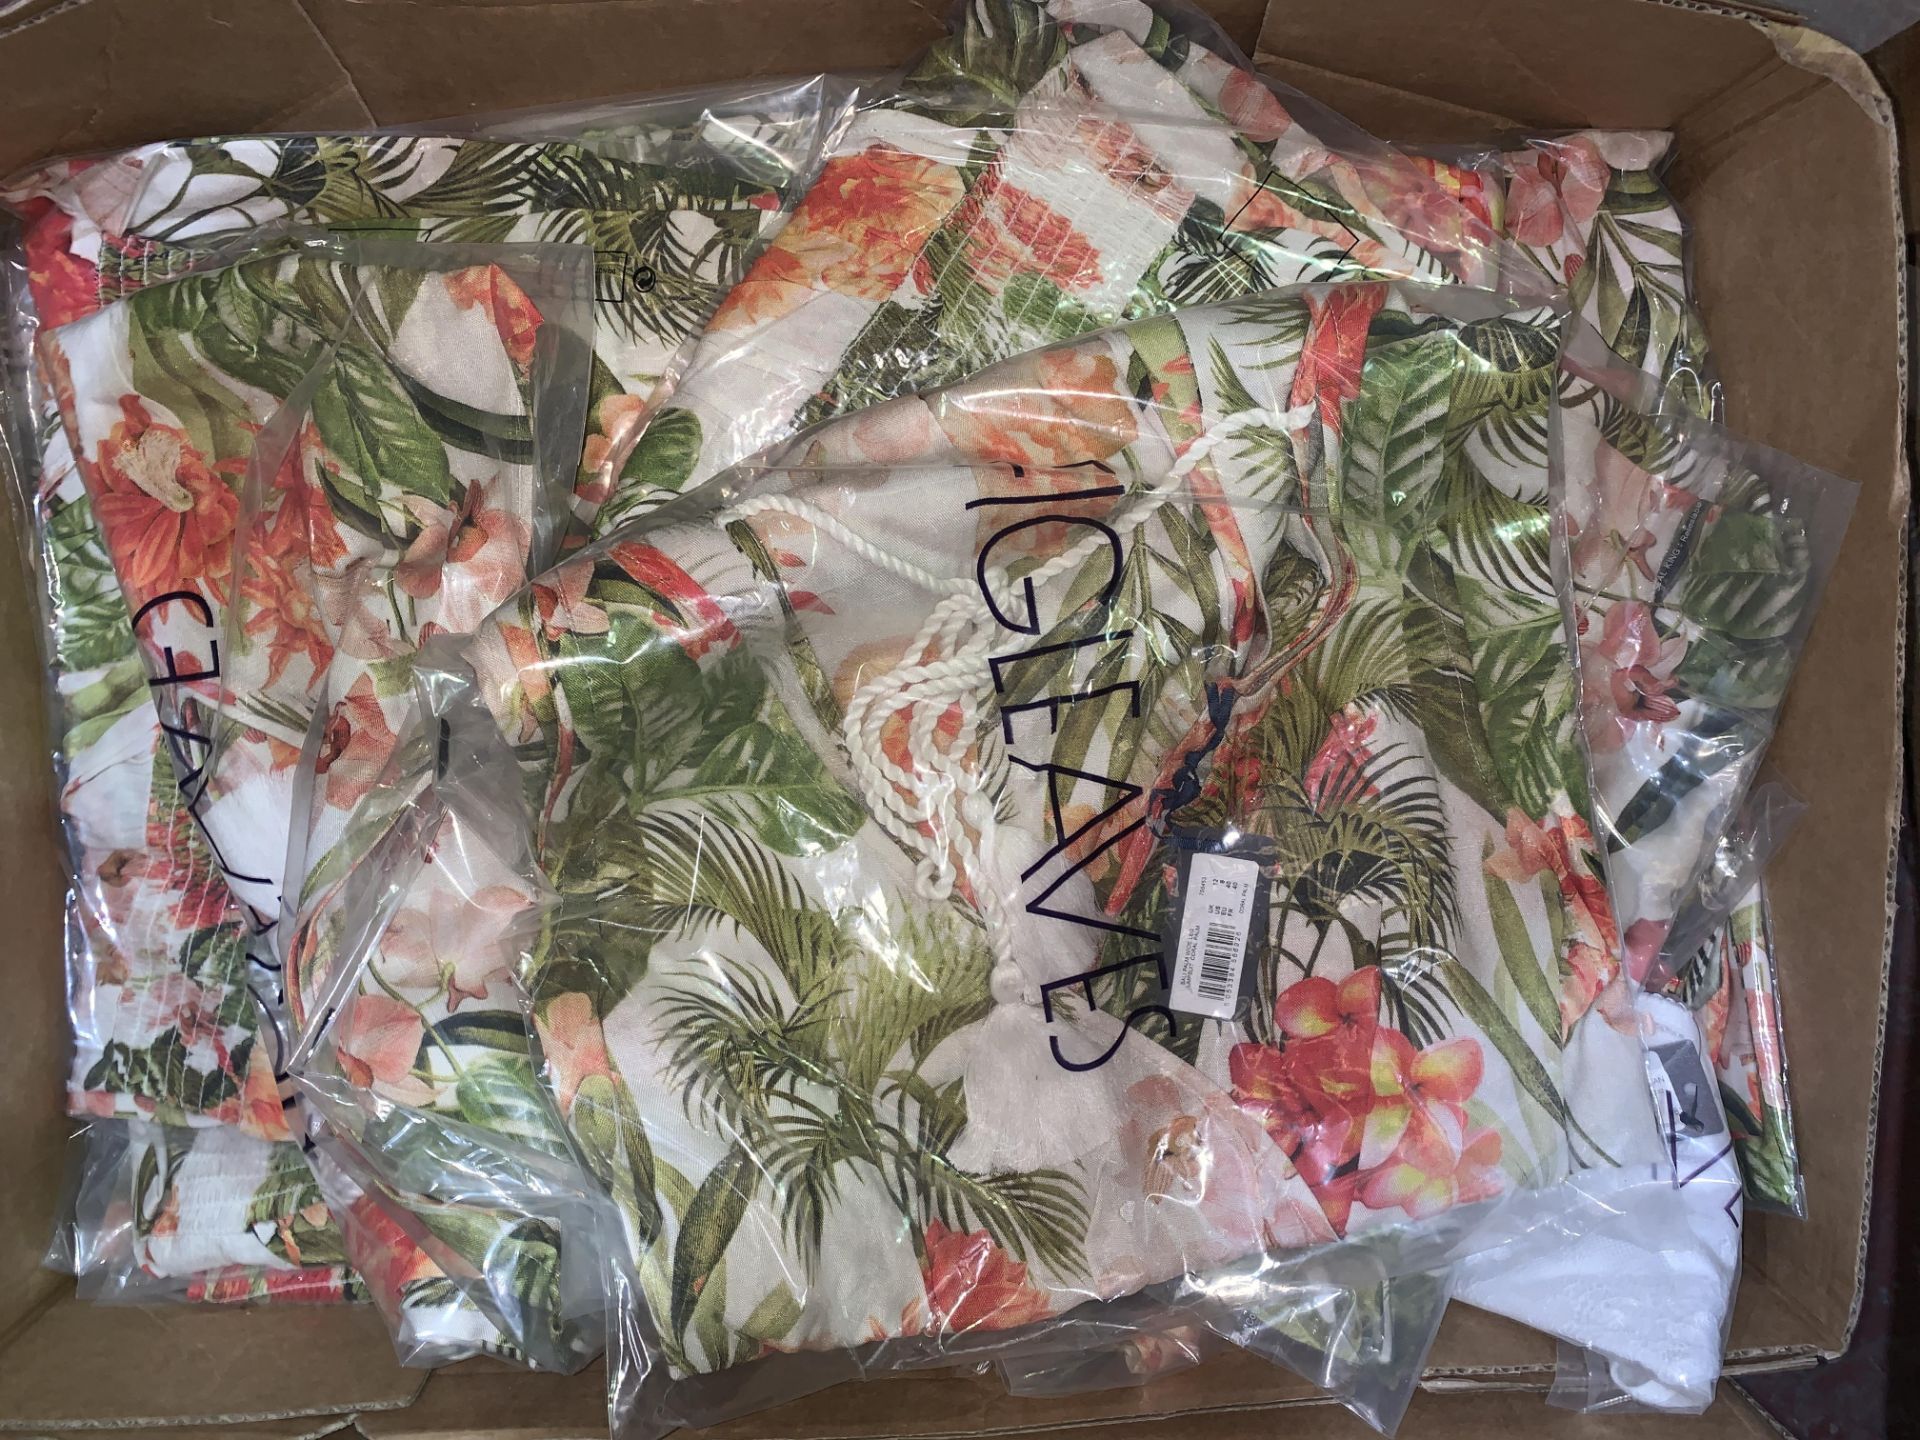 10 X BRAND NEW INDIVIDUALLY PACKAGED FIGLEAVES CORAL PALM BALI PALM WIDE LEG JUMPSUITS 755453 (SIZES